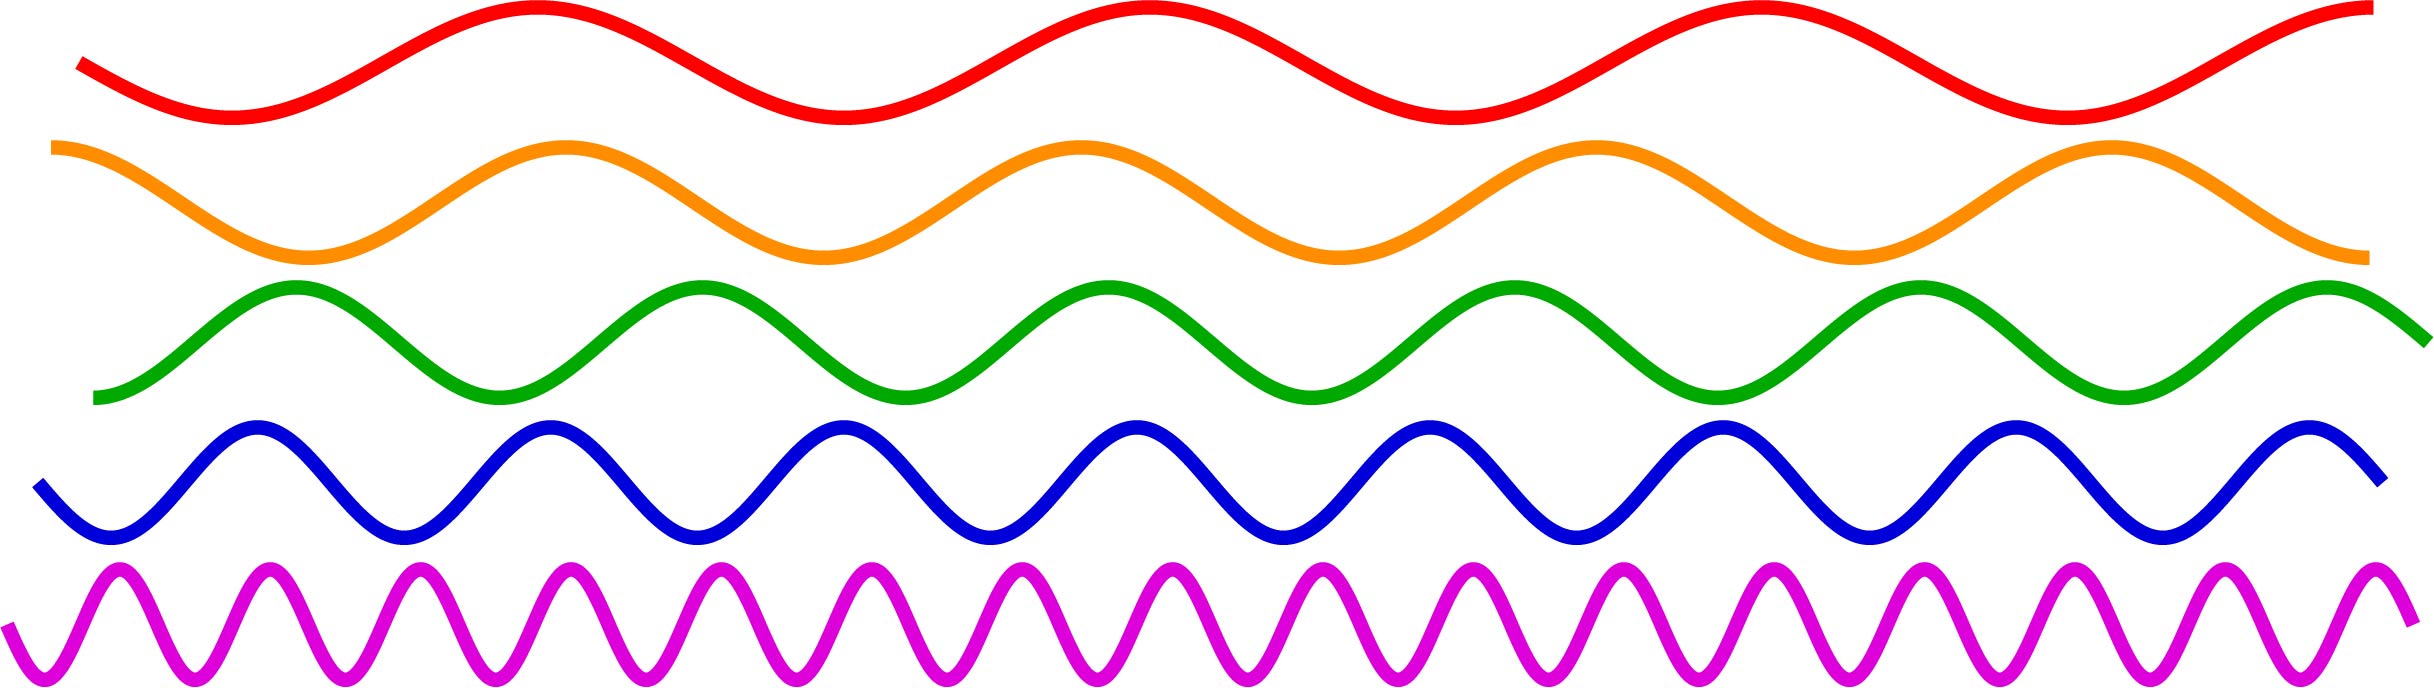 Fig. 2 (Click to enlarge). As the wavelength of a light wave decreases, its frequency increases. The red light wave has a the highest wavelength and lowest frequency of the waves shown here, while the violet light wave has the lowest wavelength and highest frequency.